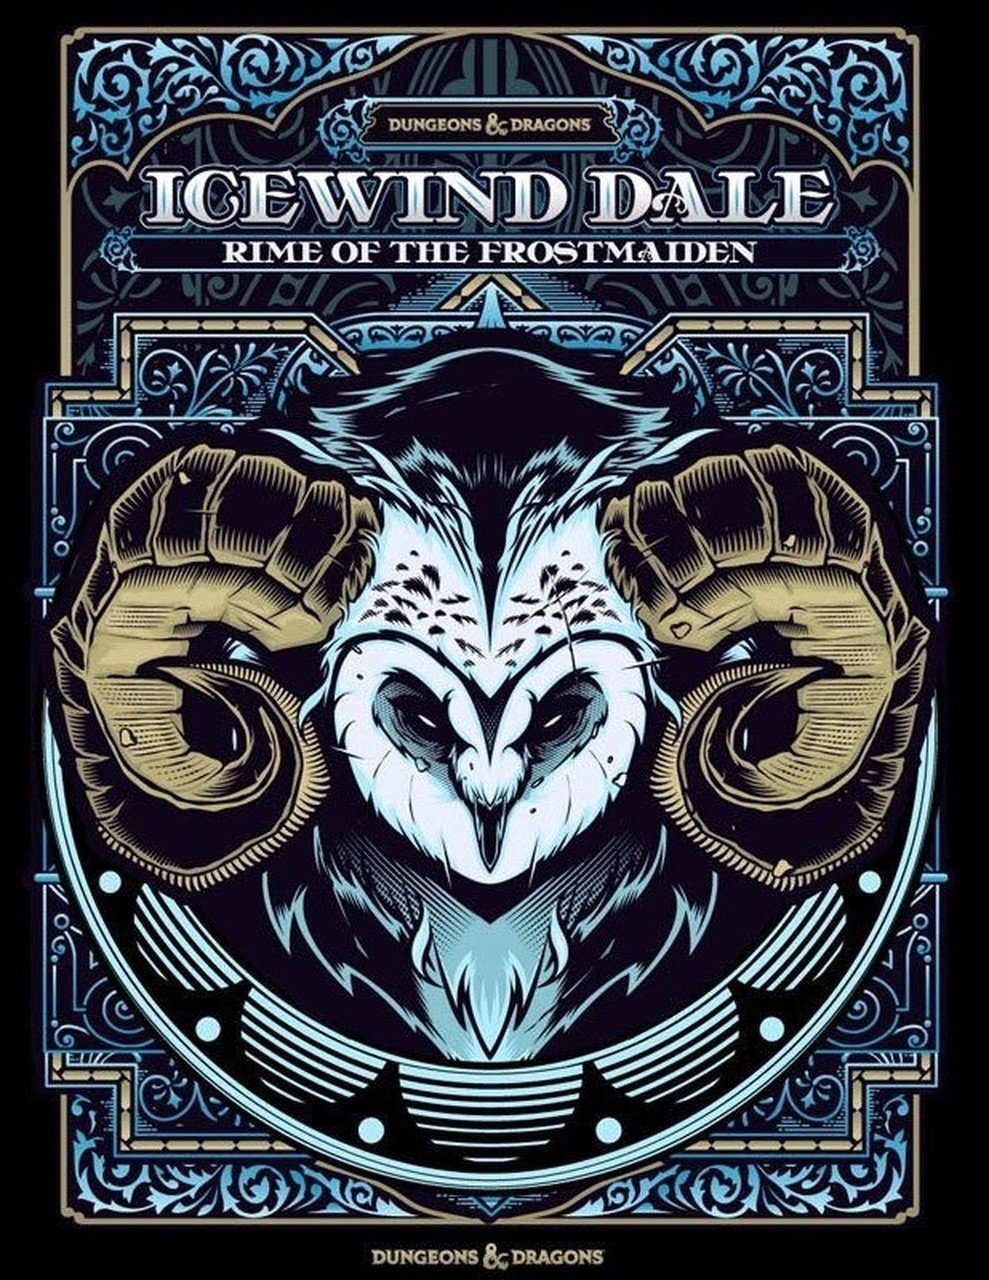 Dungeons &amp; Dragons - Icewind Dale: Rime of the Frostmaiden (Alternate Art) - Good Games